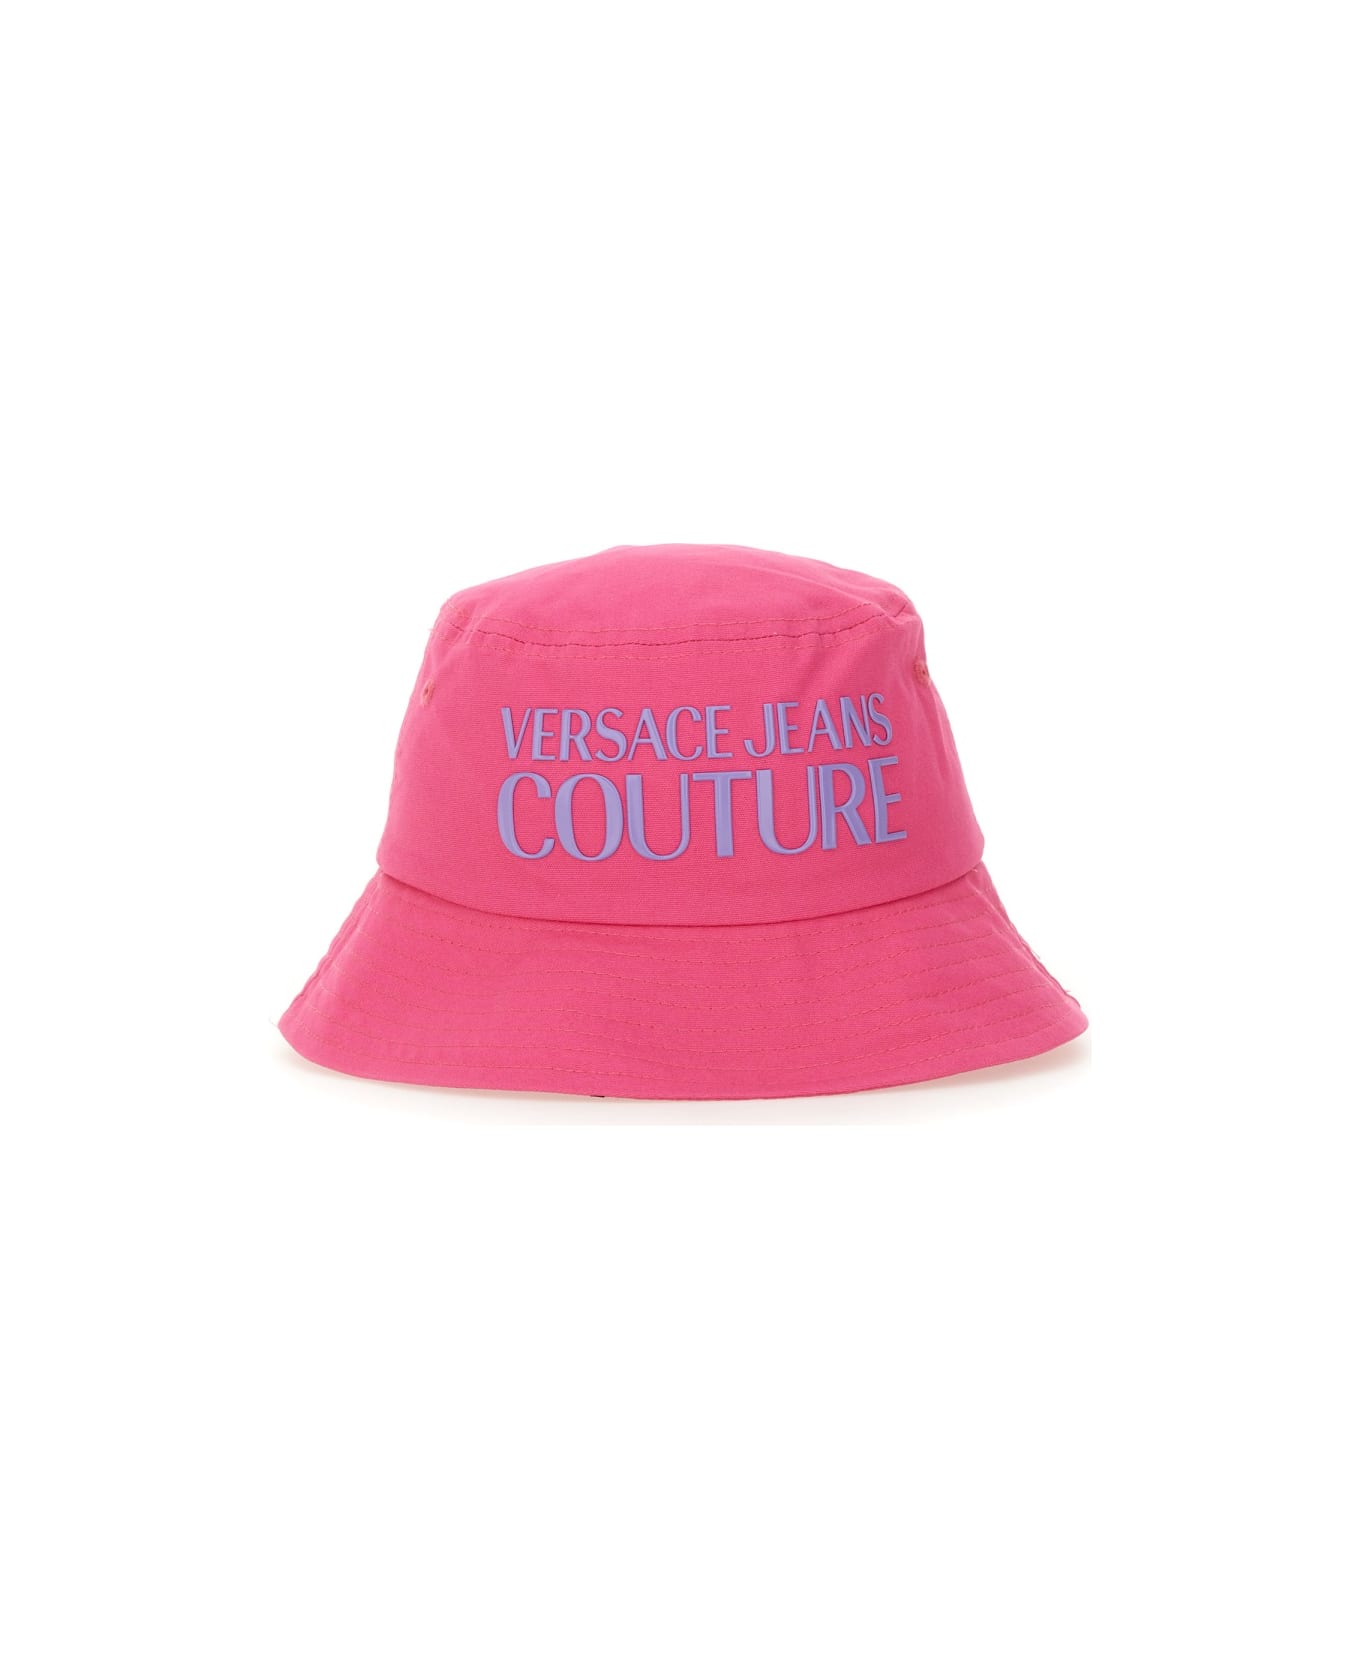 Versace Jeans Couture Bucket Hat - FUCHSIA 帽子